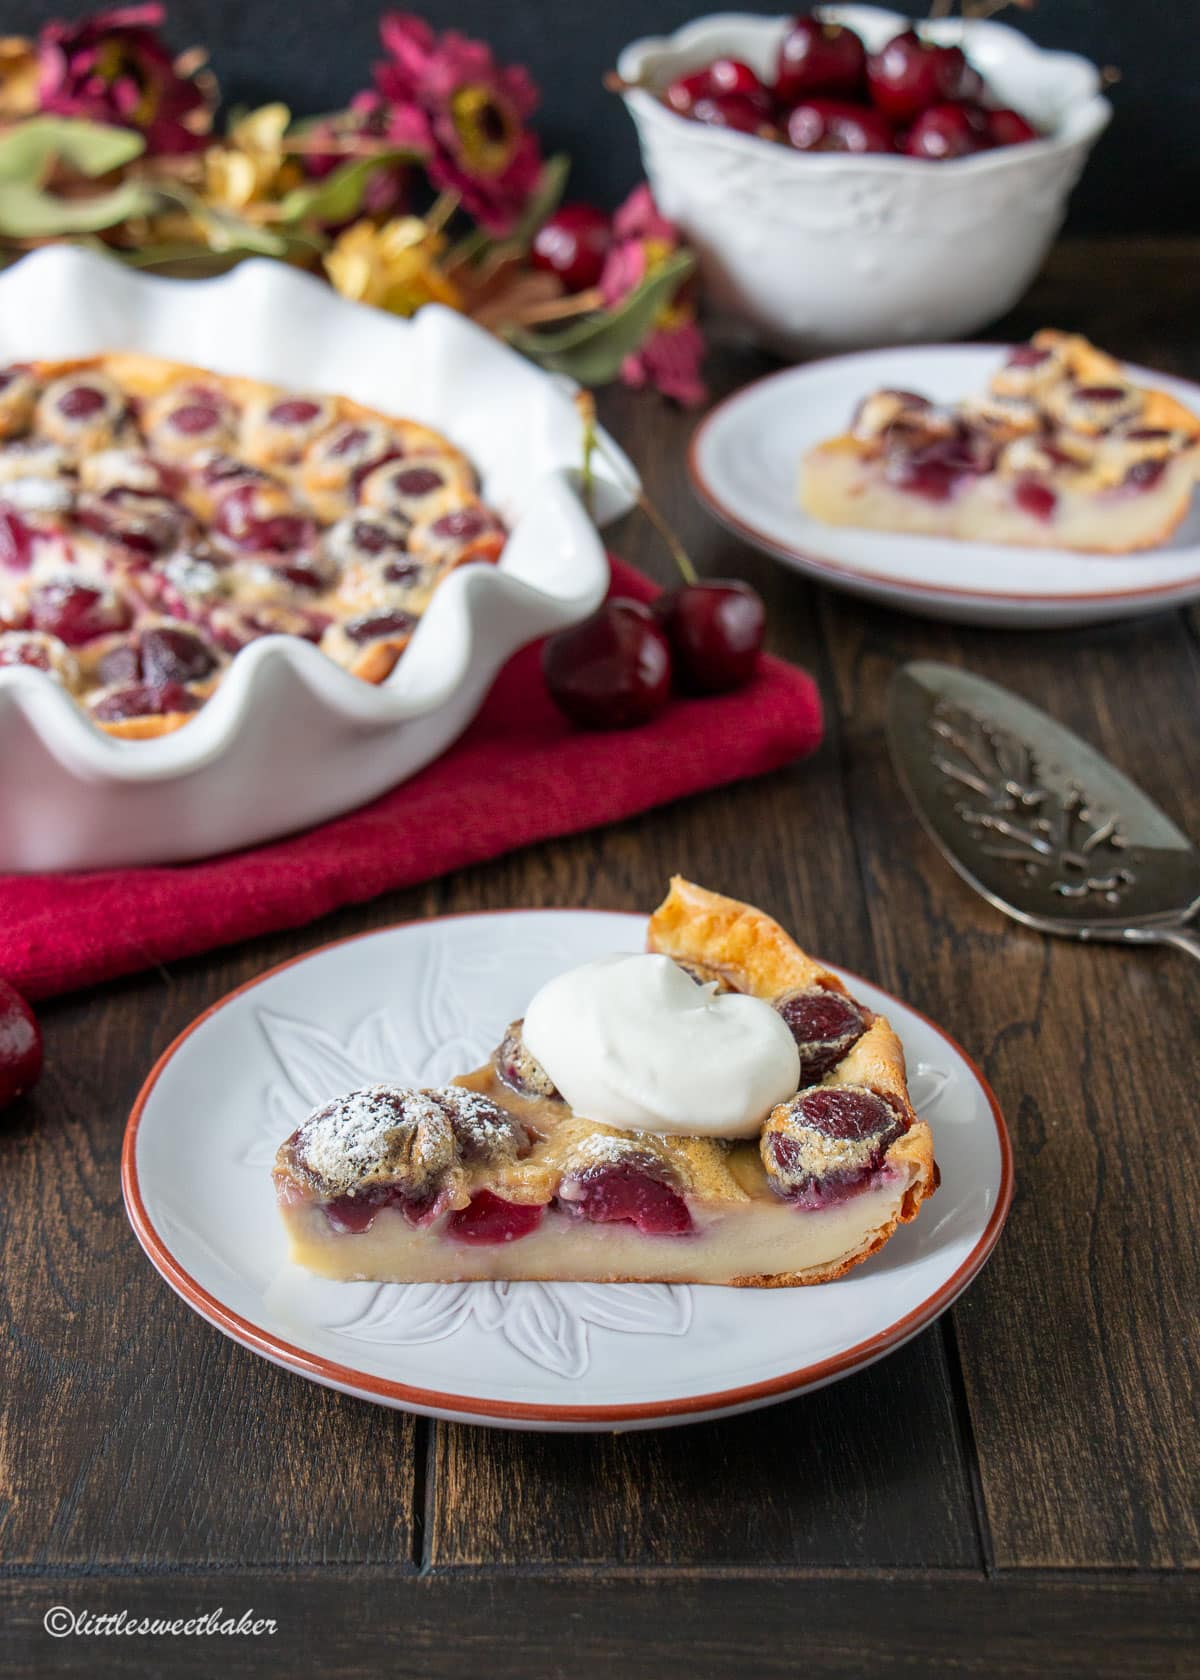 A slice of cherry clafoutis topped with whipped cream on a light grey plate.